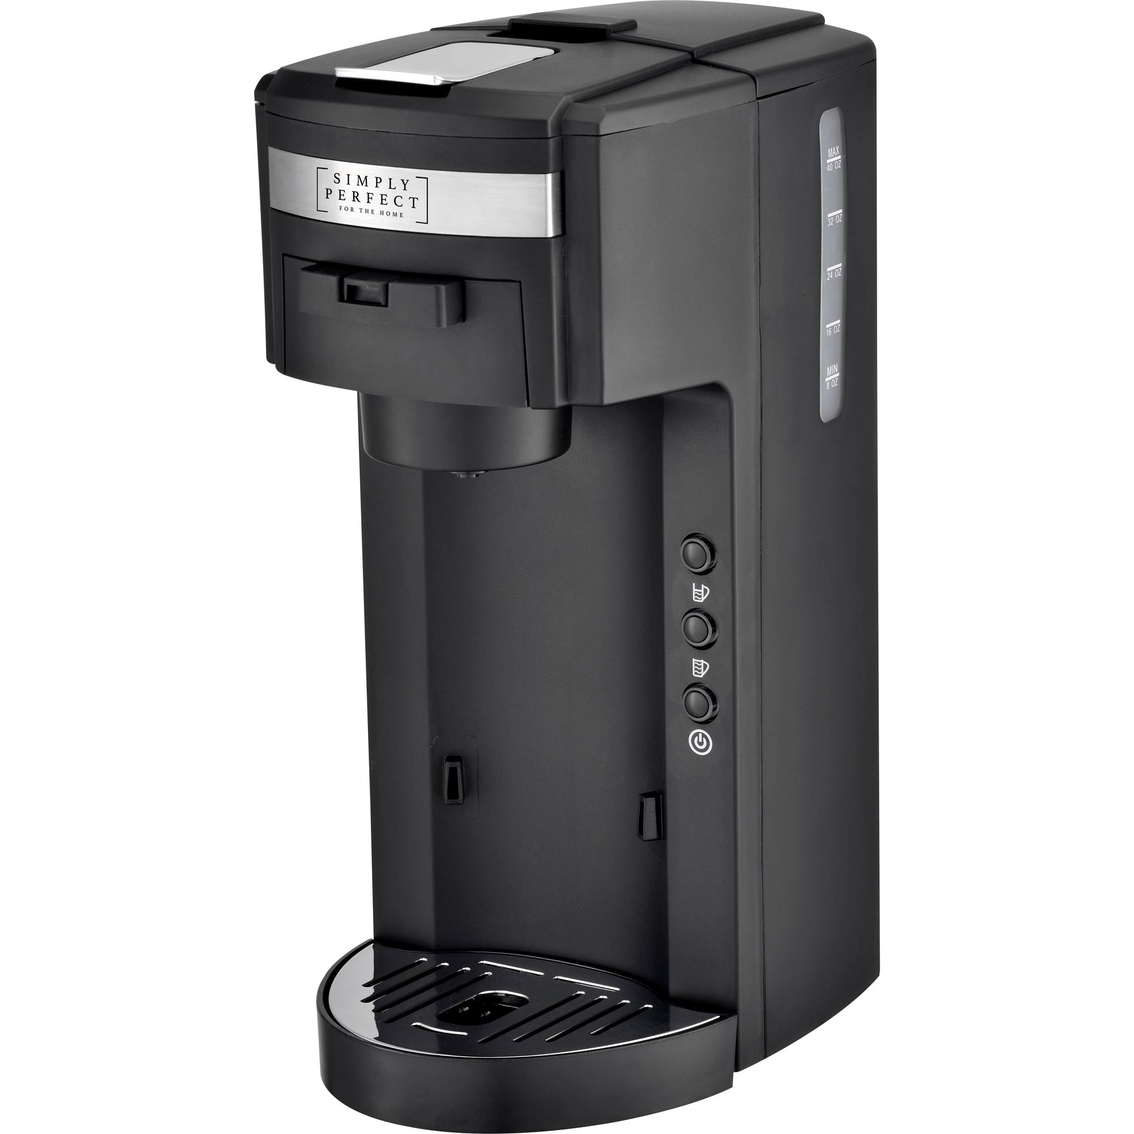 Simply Perfect Single Serve Coffee Maker - Image 2 of 4